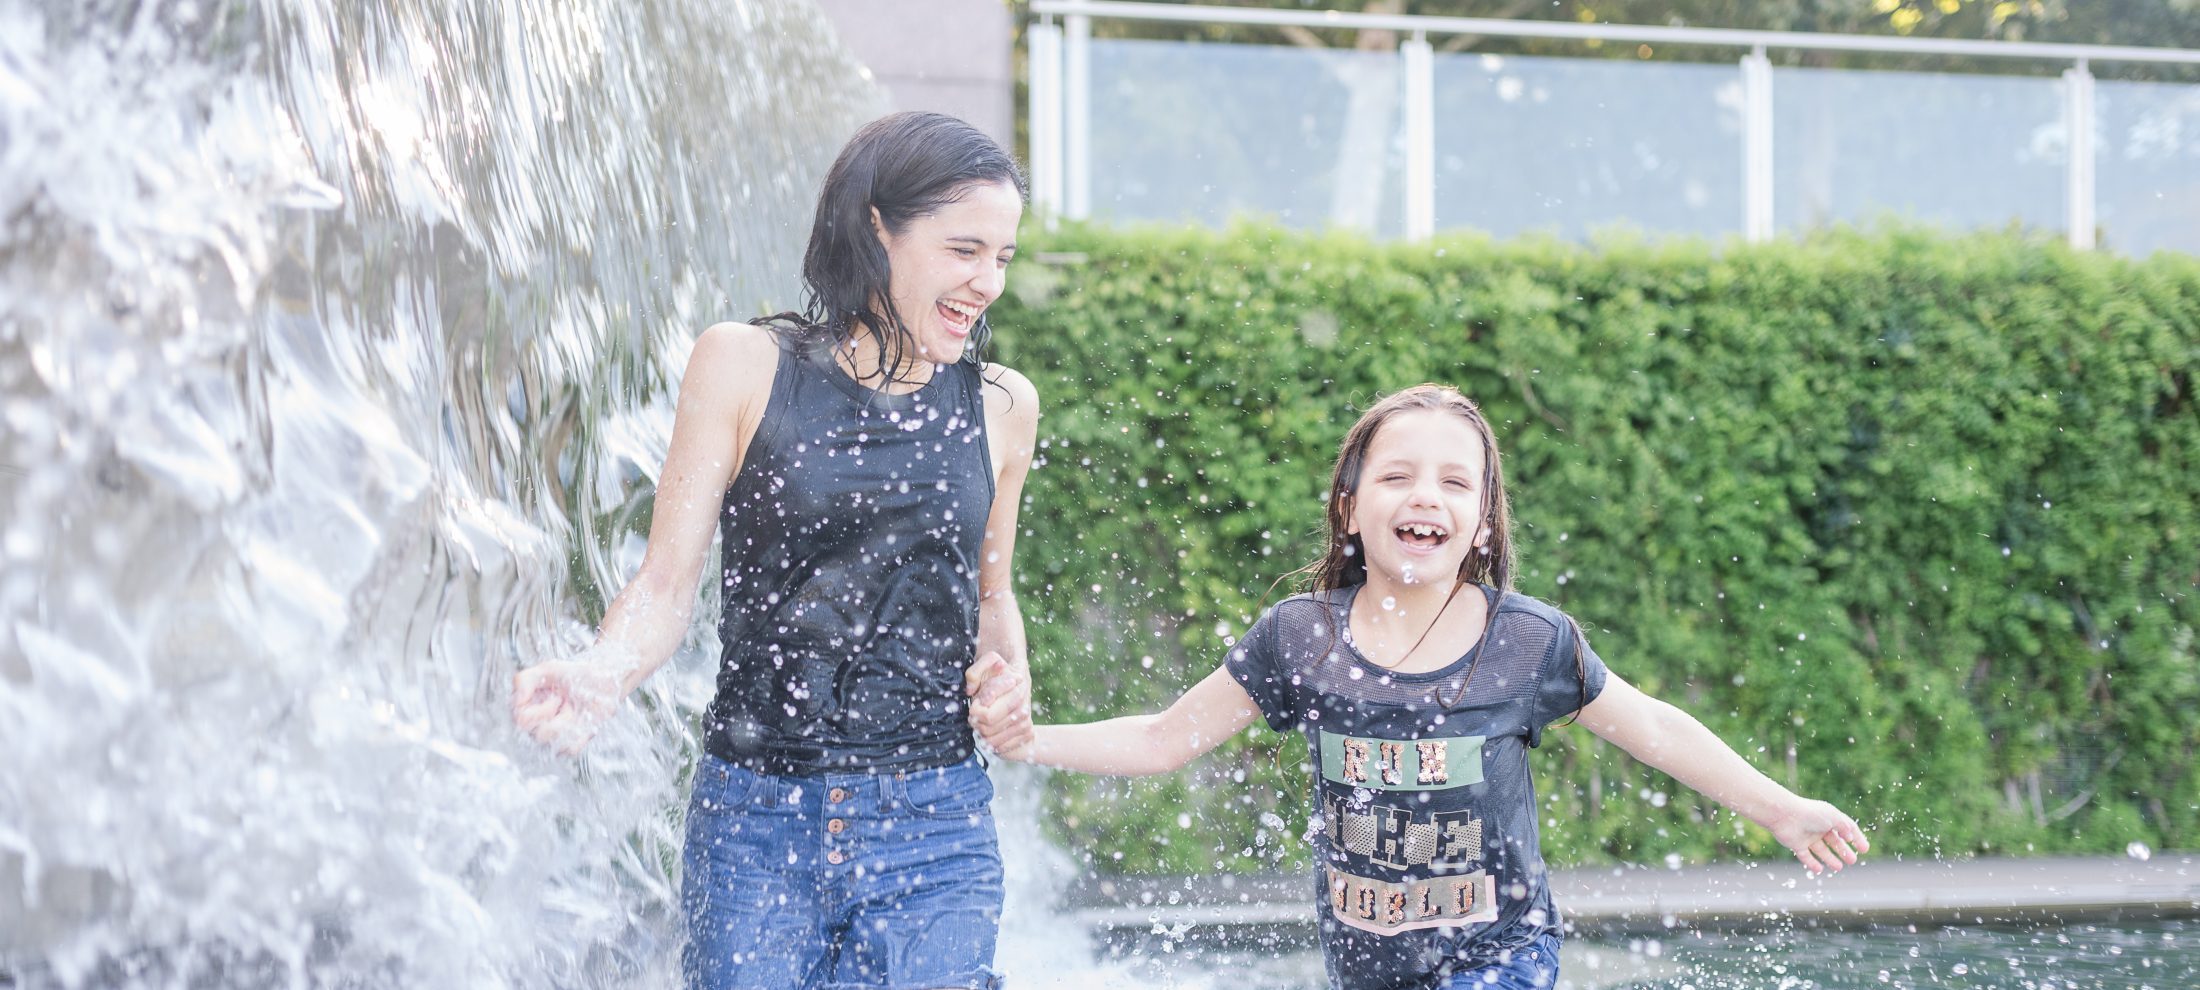 Marjorie Brimley and her daughter running through a fountain in DC after Shawn's death